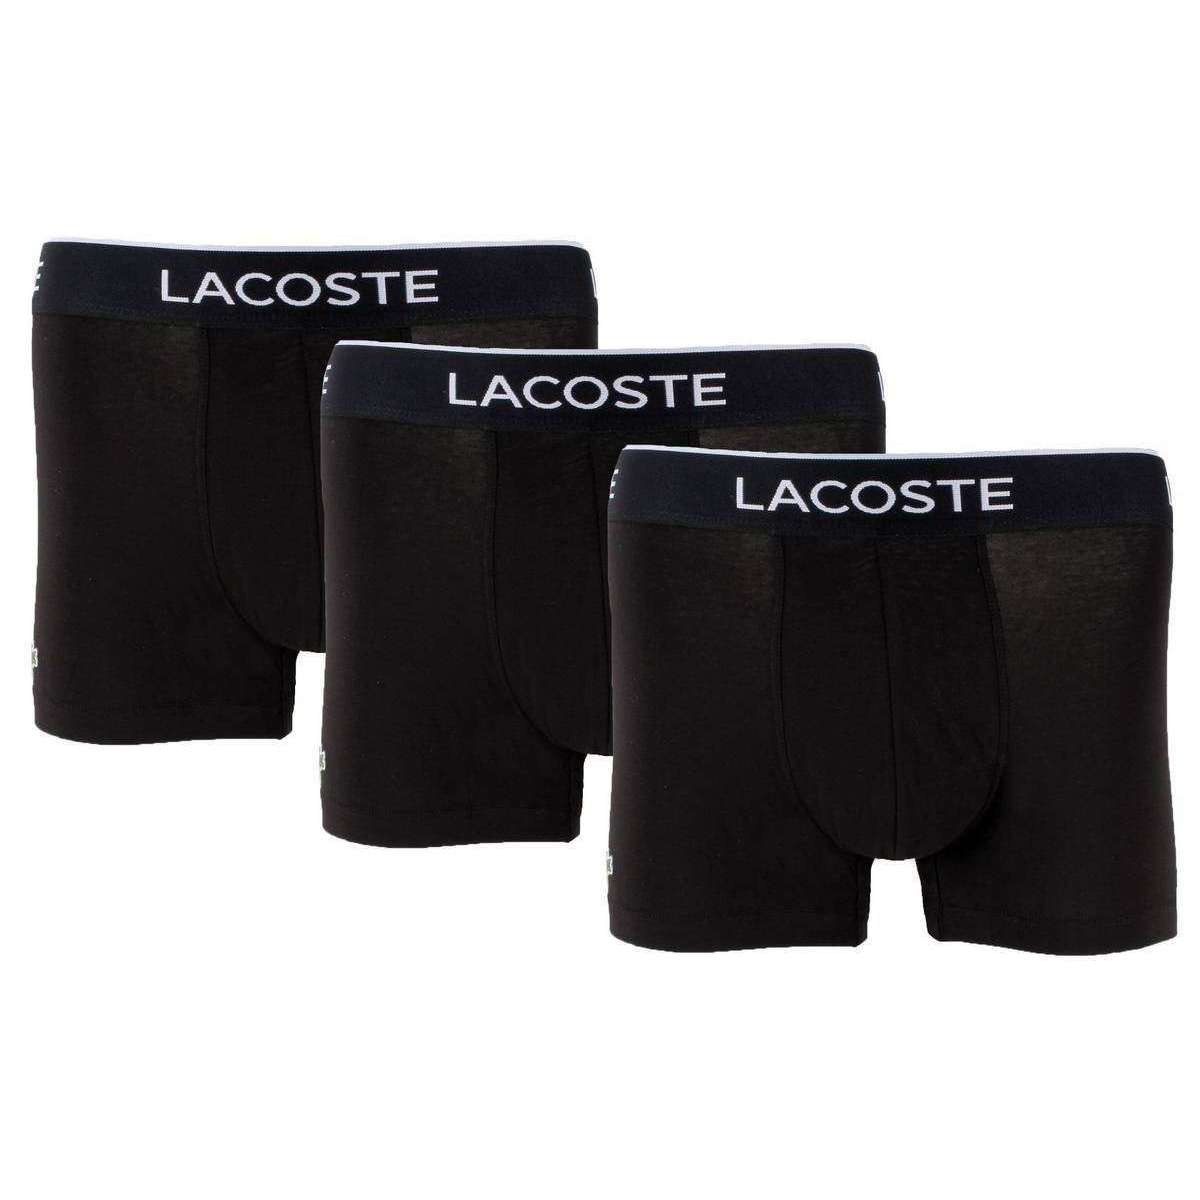 Lacoste Casual 3 Pack Trunks - Black